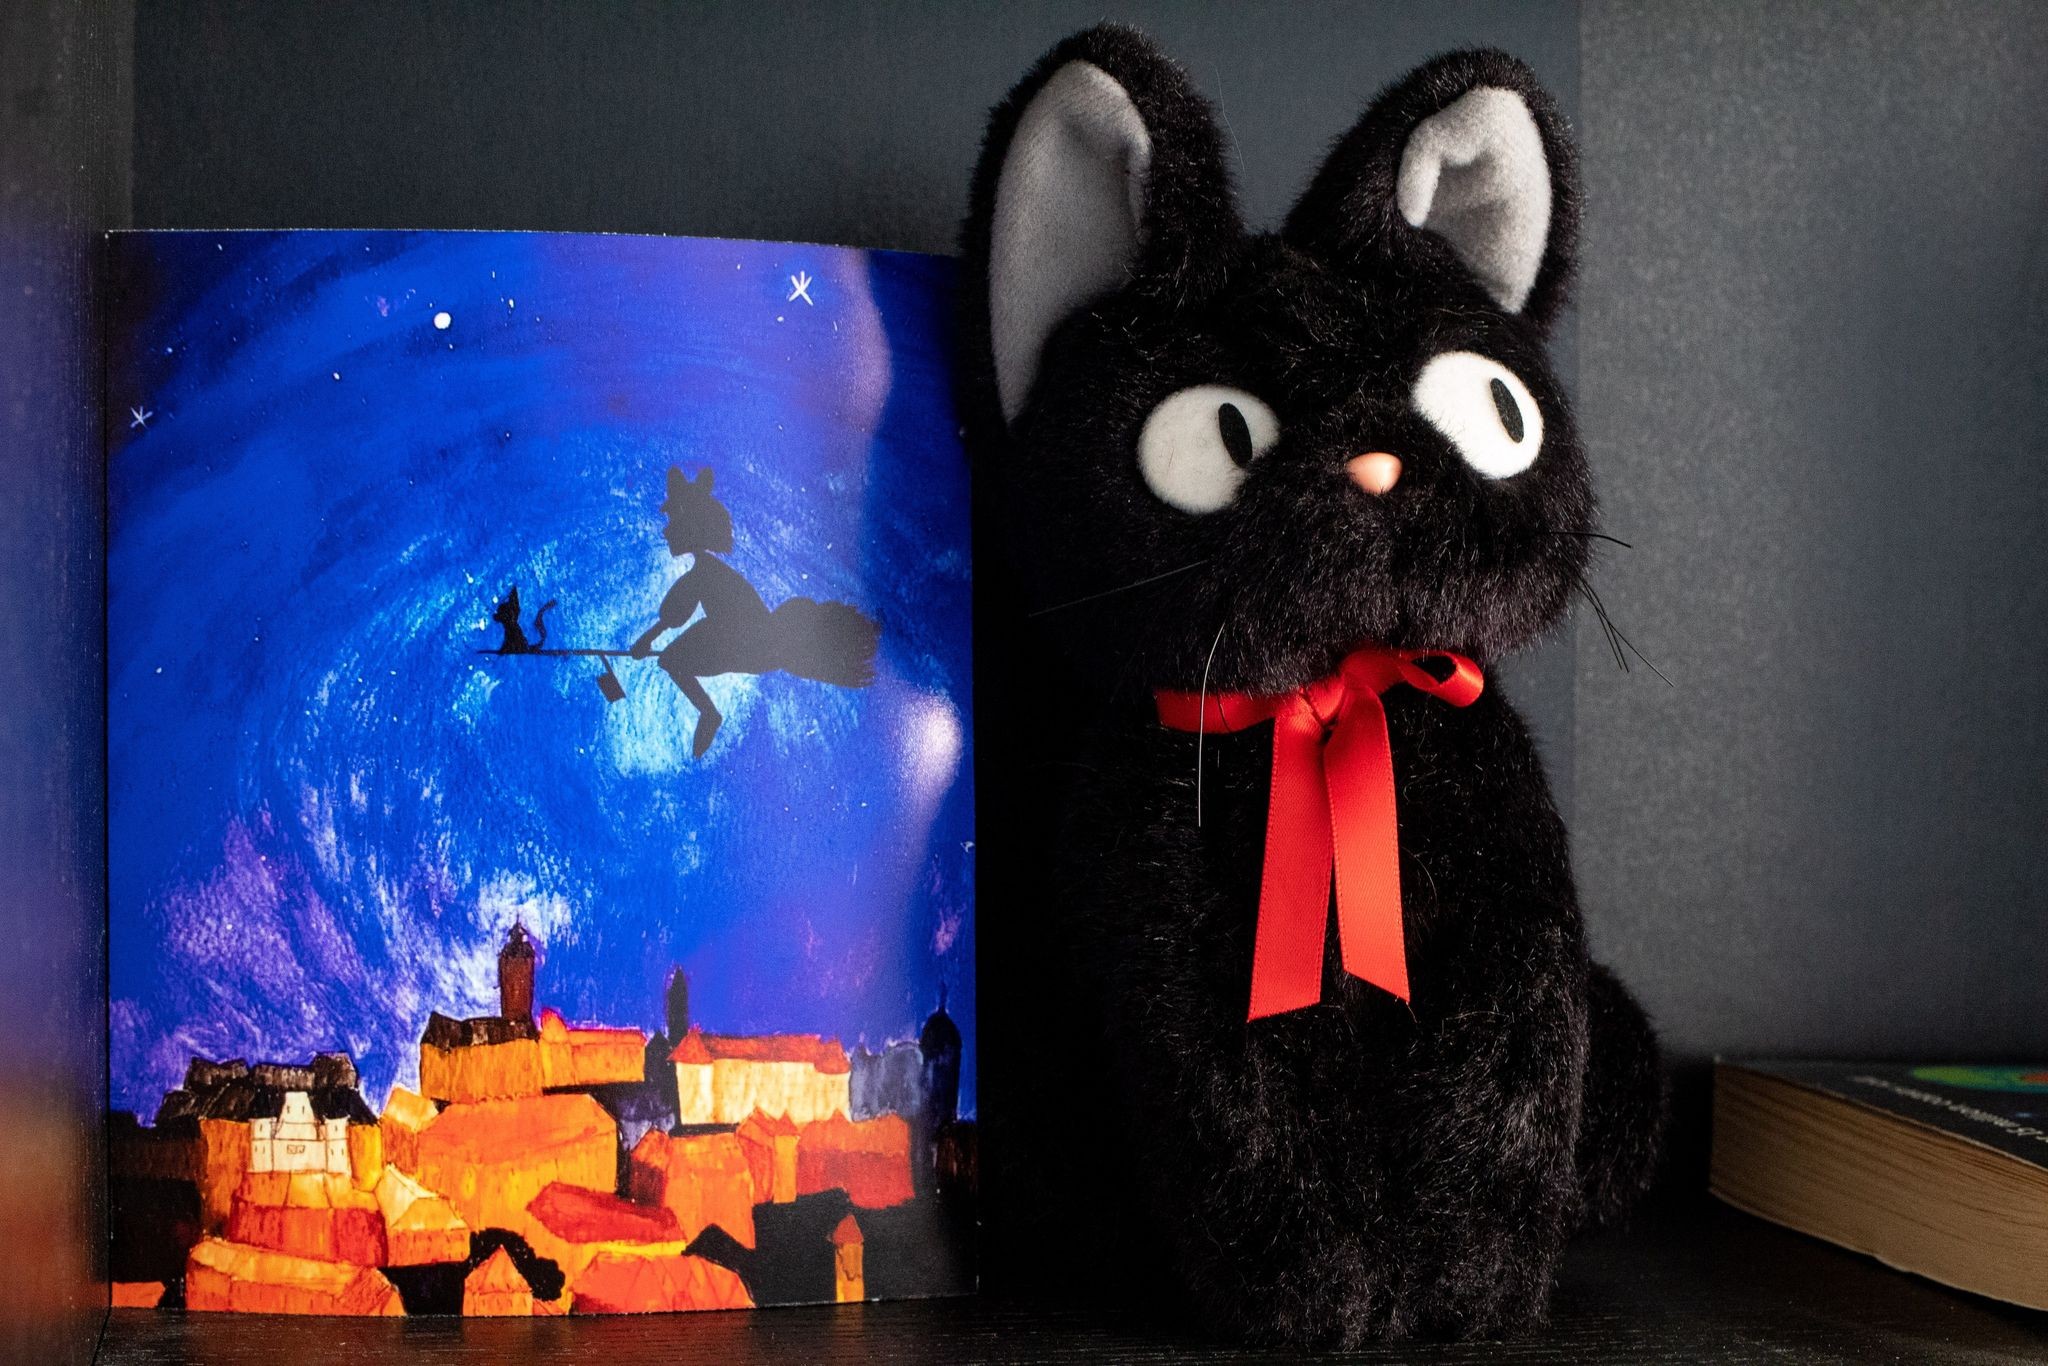 Product image of "A Magical Night" print set on a bookshelf sitting beside a black cat plushie